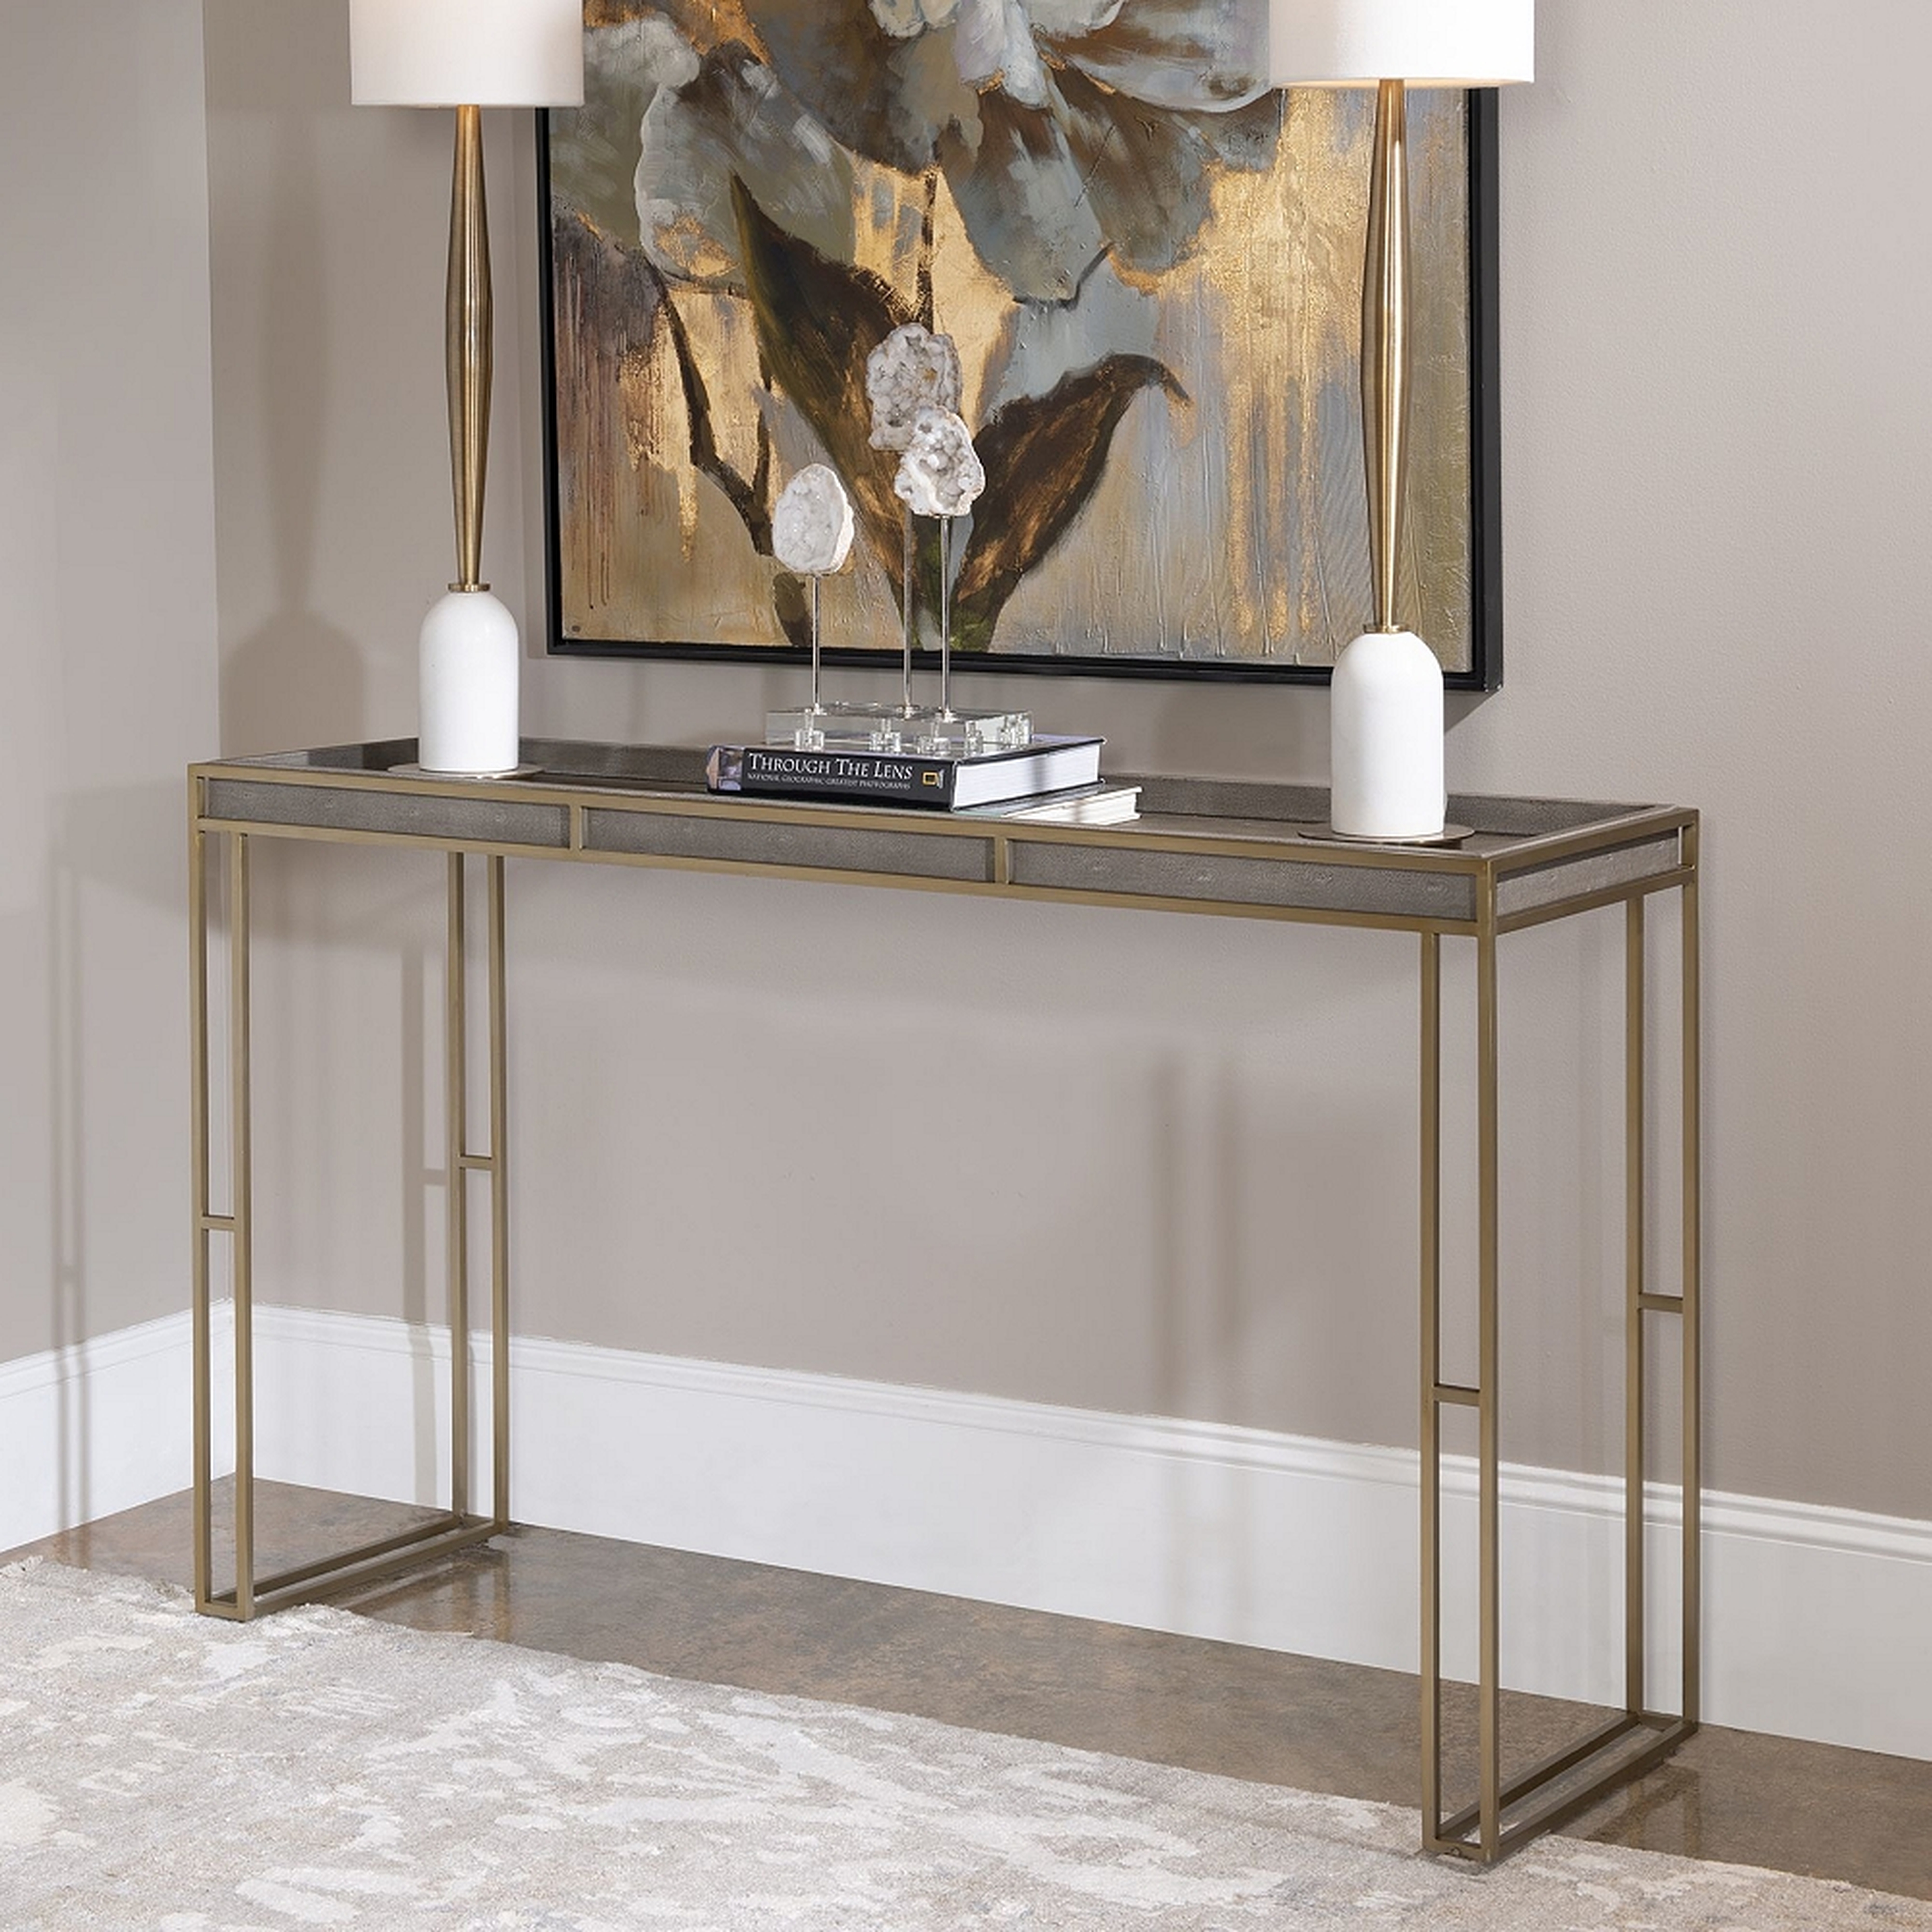 Uttermost Cardew 54"W Charcoal Gray and Brass Console Table - Style # 78D63 - Lamps Plus